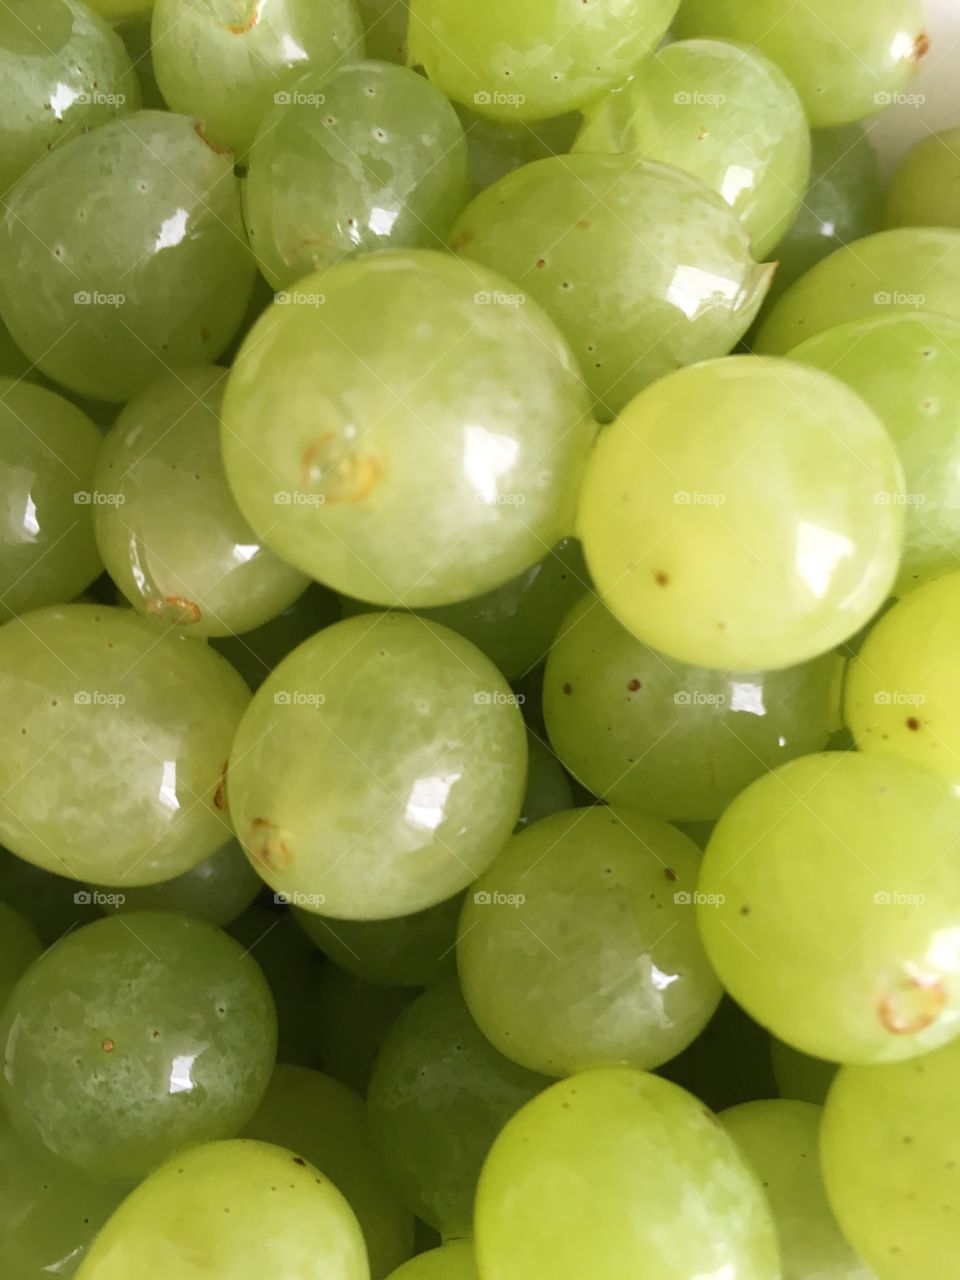 Beautiful and delicious grapes 